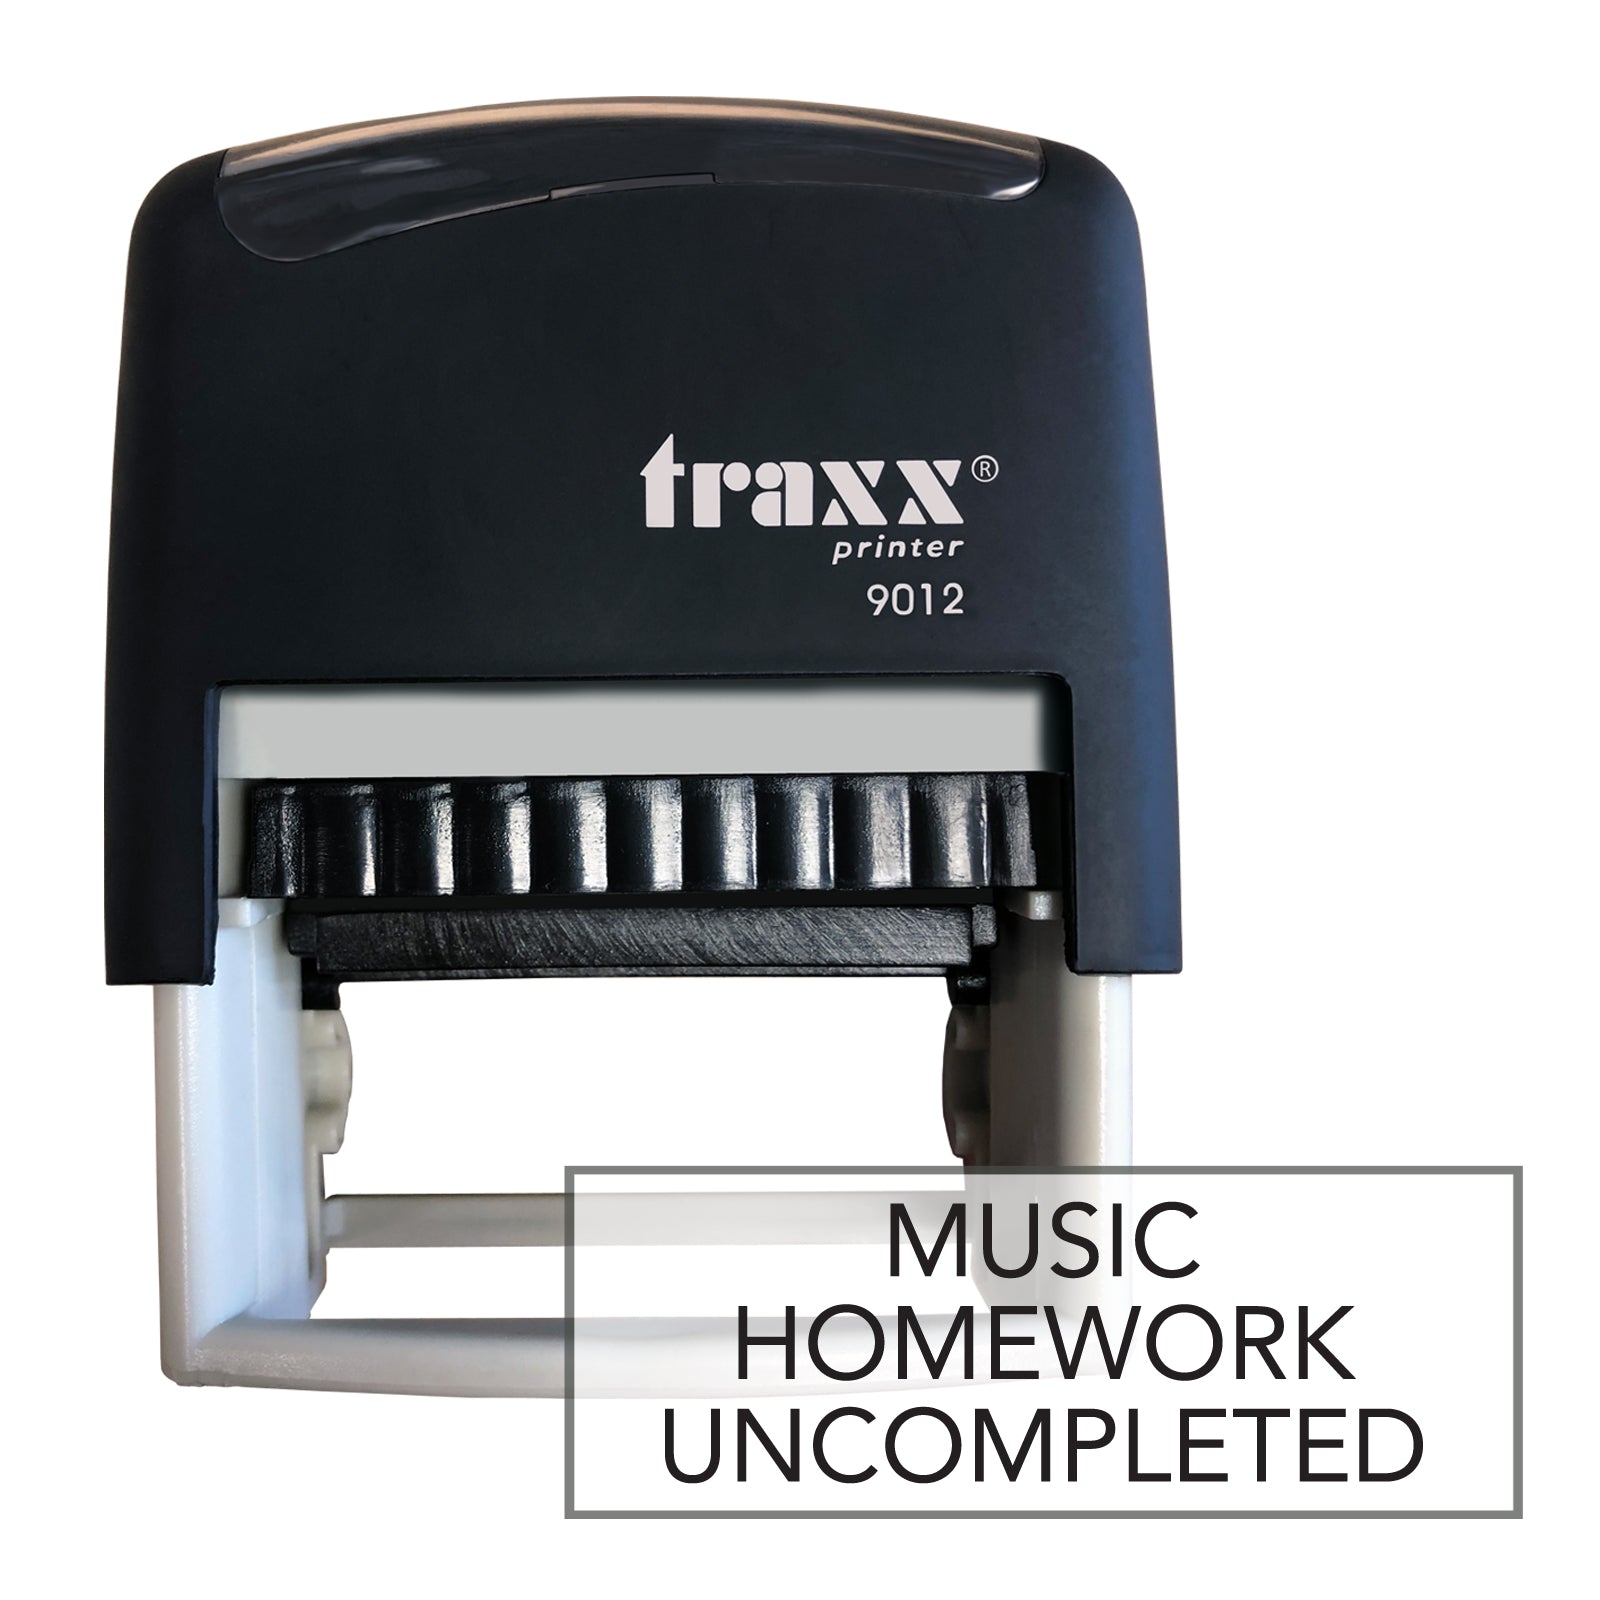 Traxx 9012 48 x 18mm Homework Uncompleted - Music